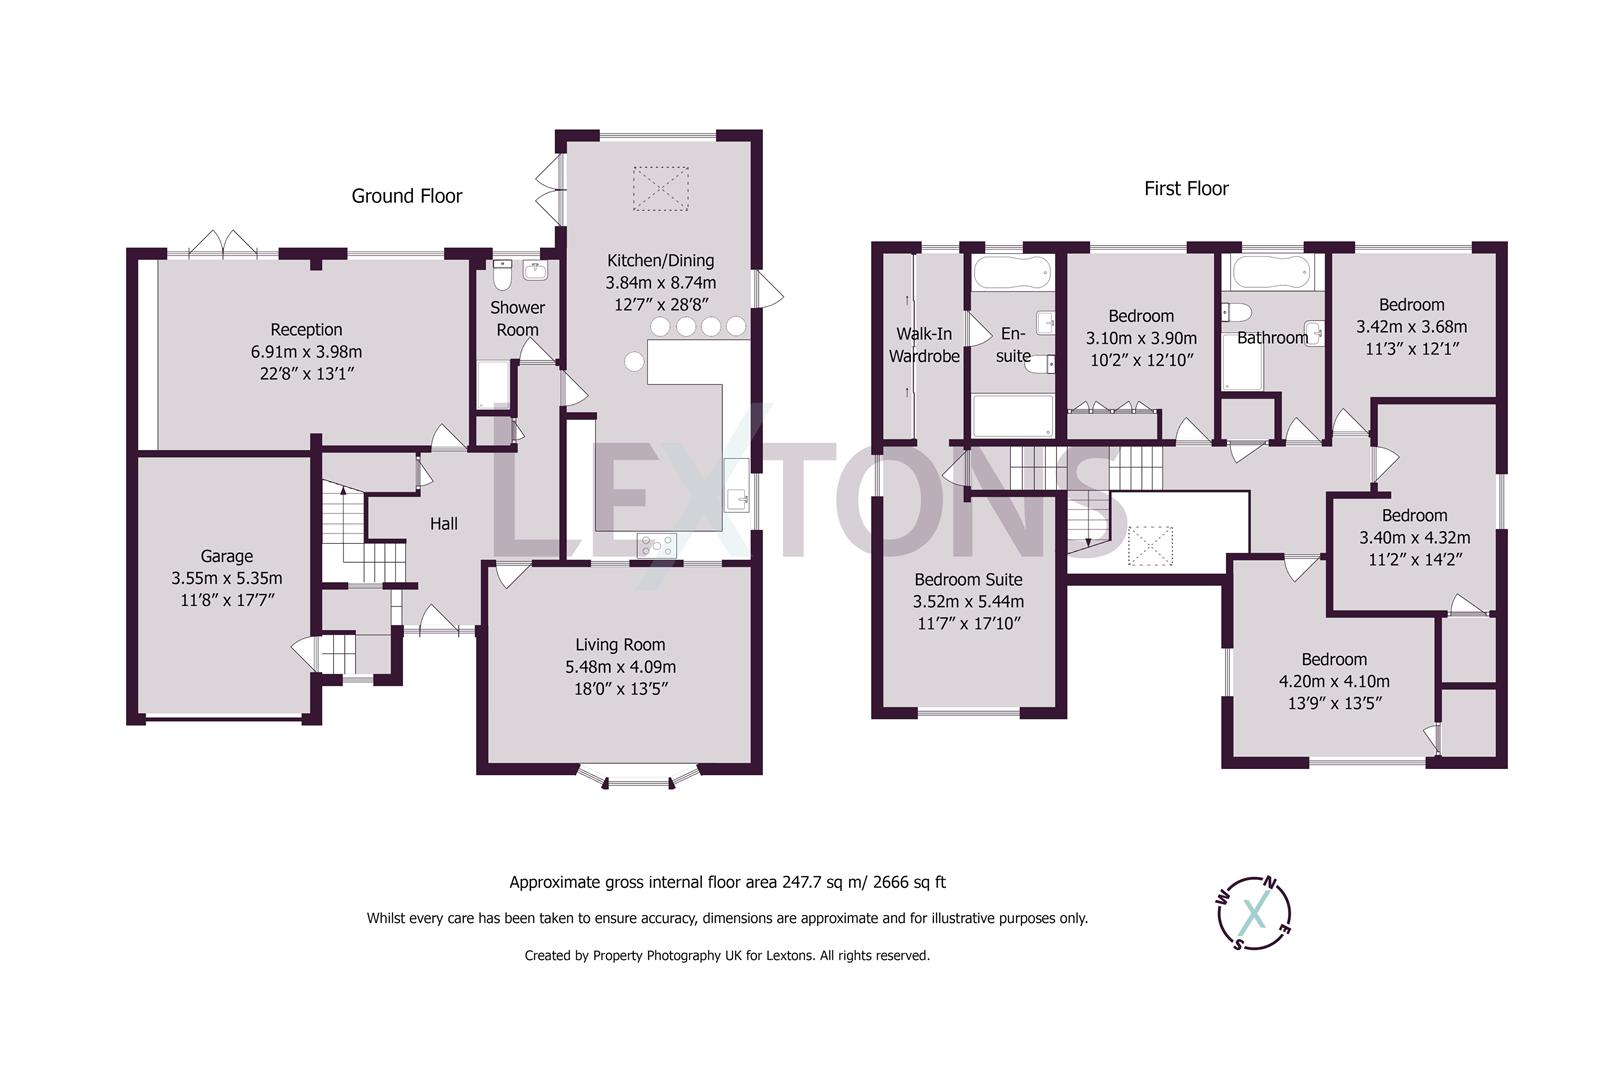 Floorplans For Hill Drive, Hove